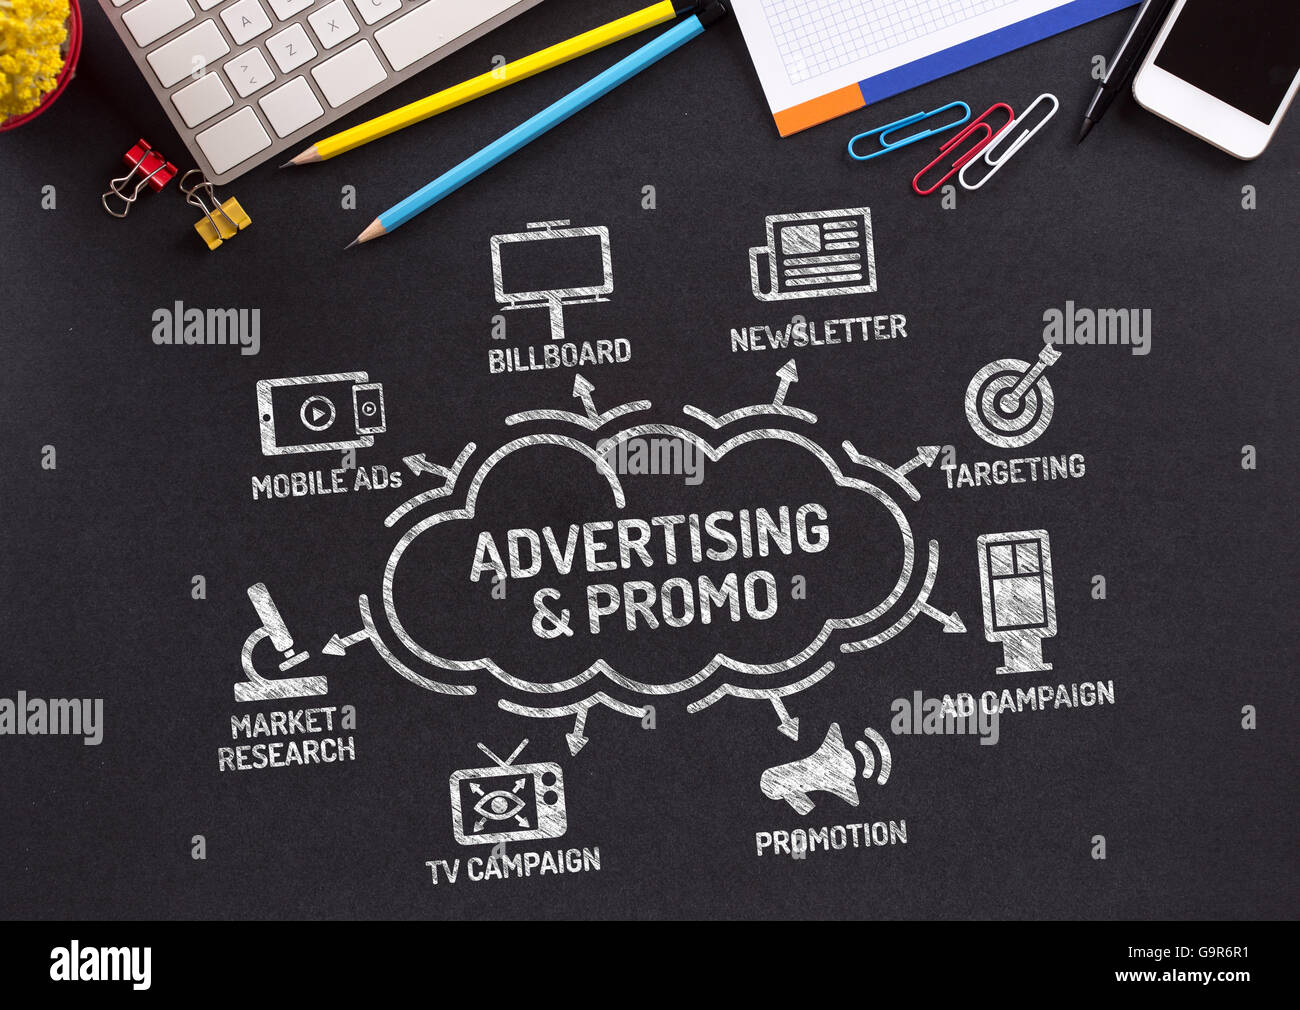 Advertising and Promo Chart with keywords and icons on blackboard Stock Photo